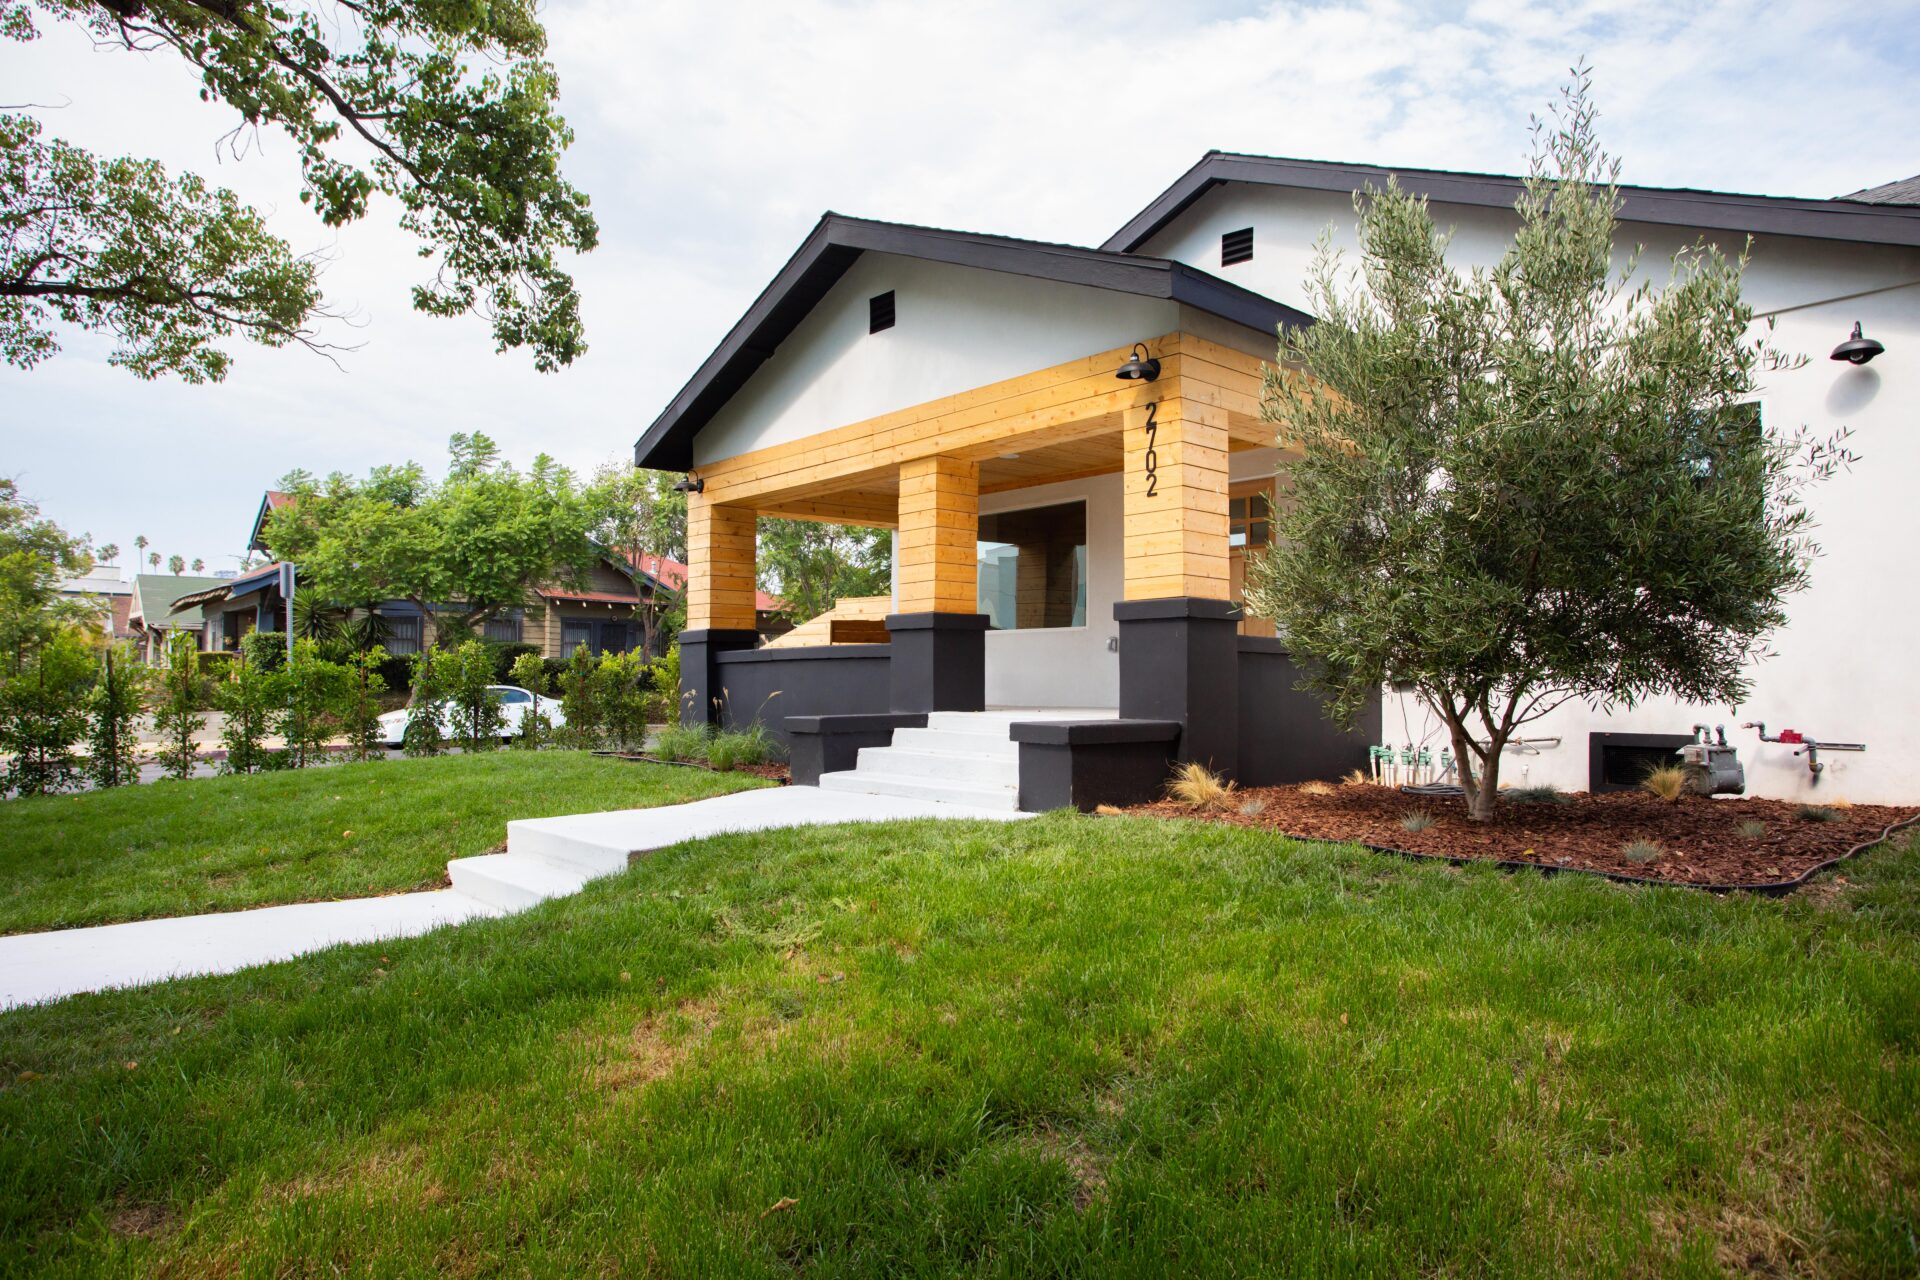 Elevated Design And Sophisticated Elegance Abound In This Modern Bungalow